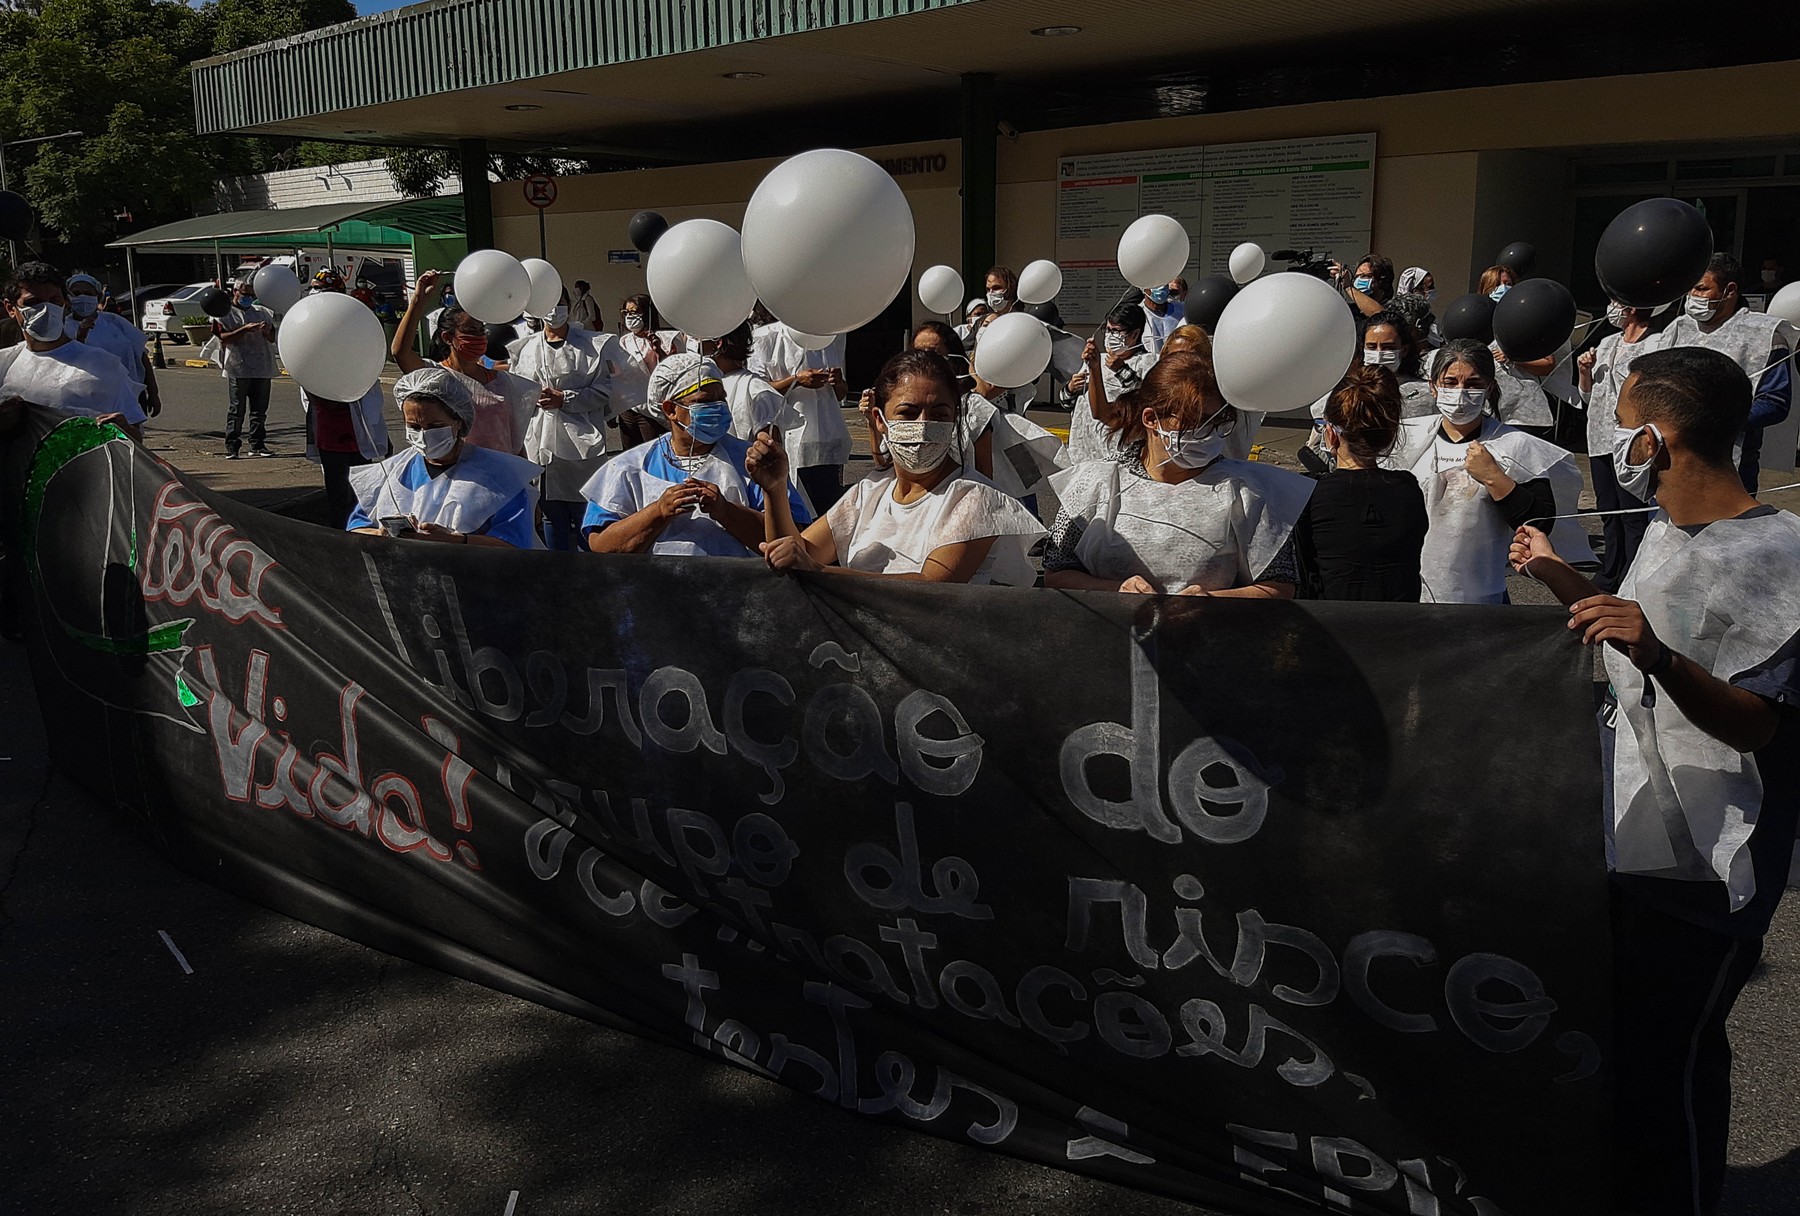 May 12, 2020: About 50 essential health professionals stopped their activities to protest with balloons in front of the University Hospital of Sao Paulo. The protesters, in addition to holding black and white balloons, wore vests with black crosses and walked around the hospital., Image: 518854252, License: Rights-managed, Restrictions: , Model Release: no, Credit line: Dario Oliveira / Zuma Press / Profimedia